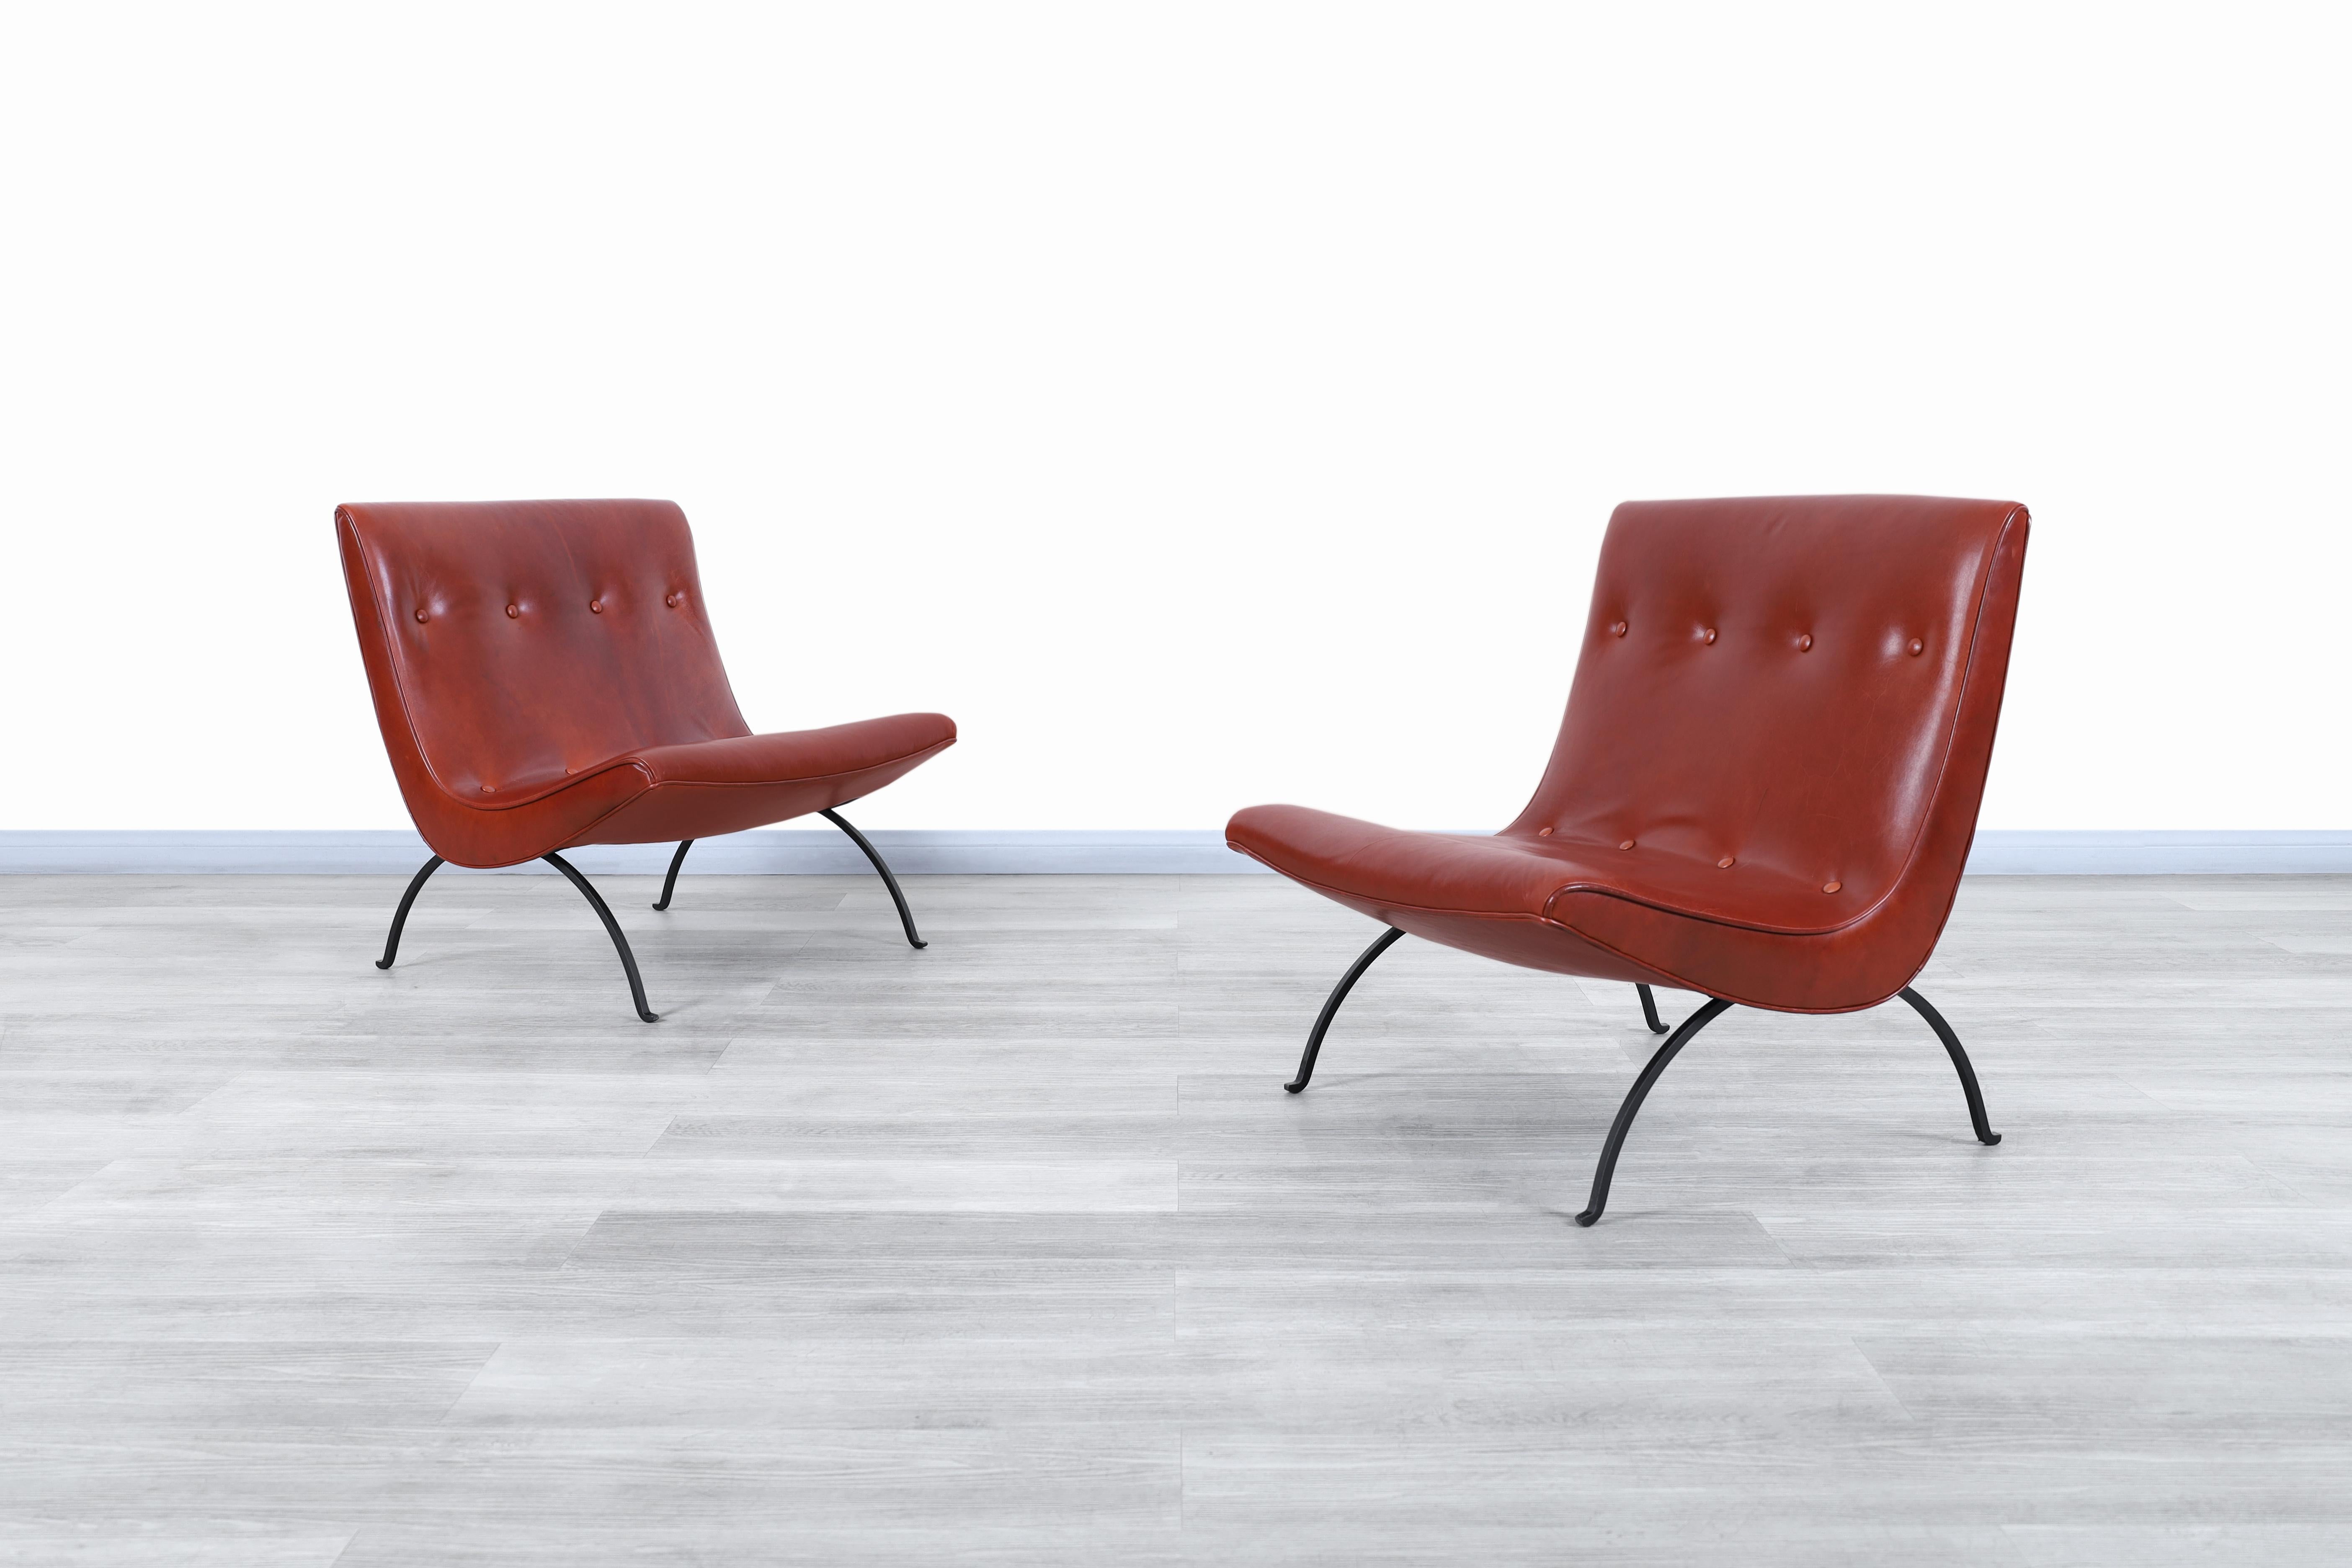 Fabulous vintage leather and iron “Scoop” lounge chairs designed by Milo Baughman for Thayer Coggin in the United States, circa 1950s. These chairs have a unique and innovative design, characteristics that distinguish Milo Baughman's design apart